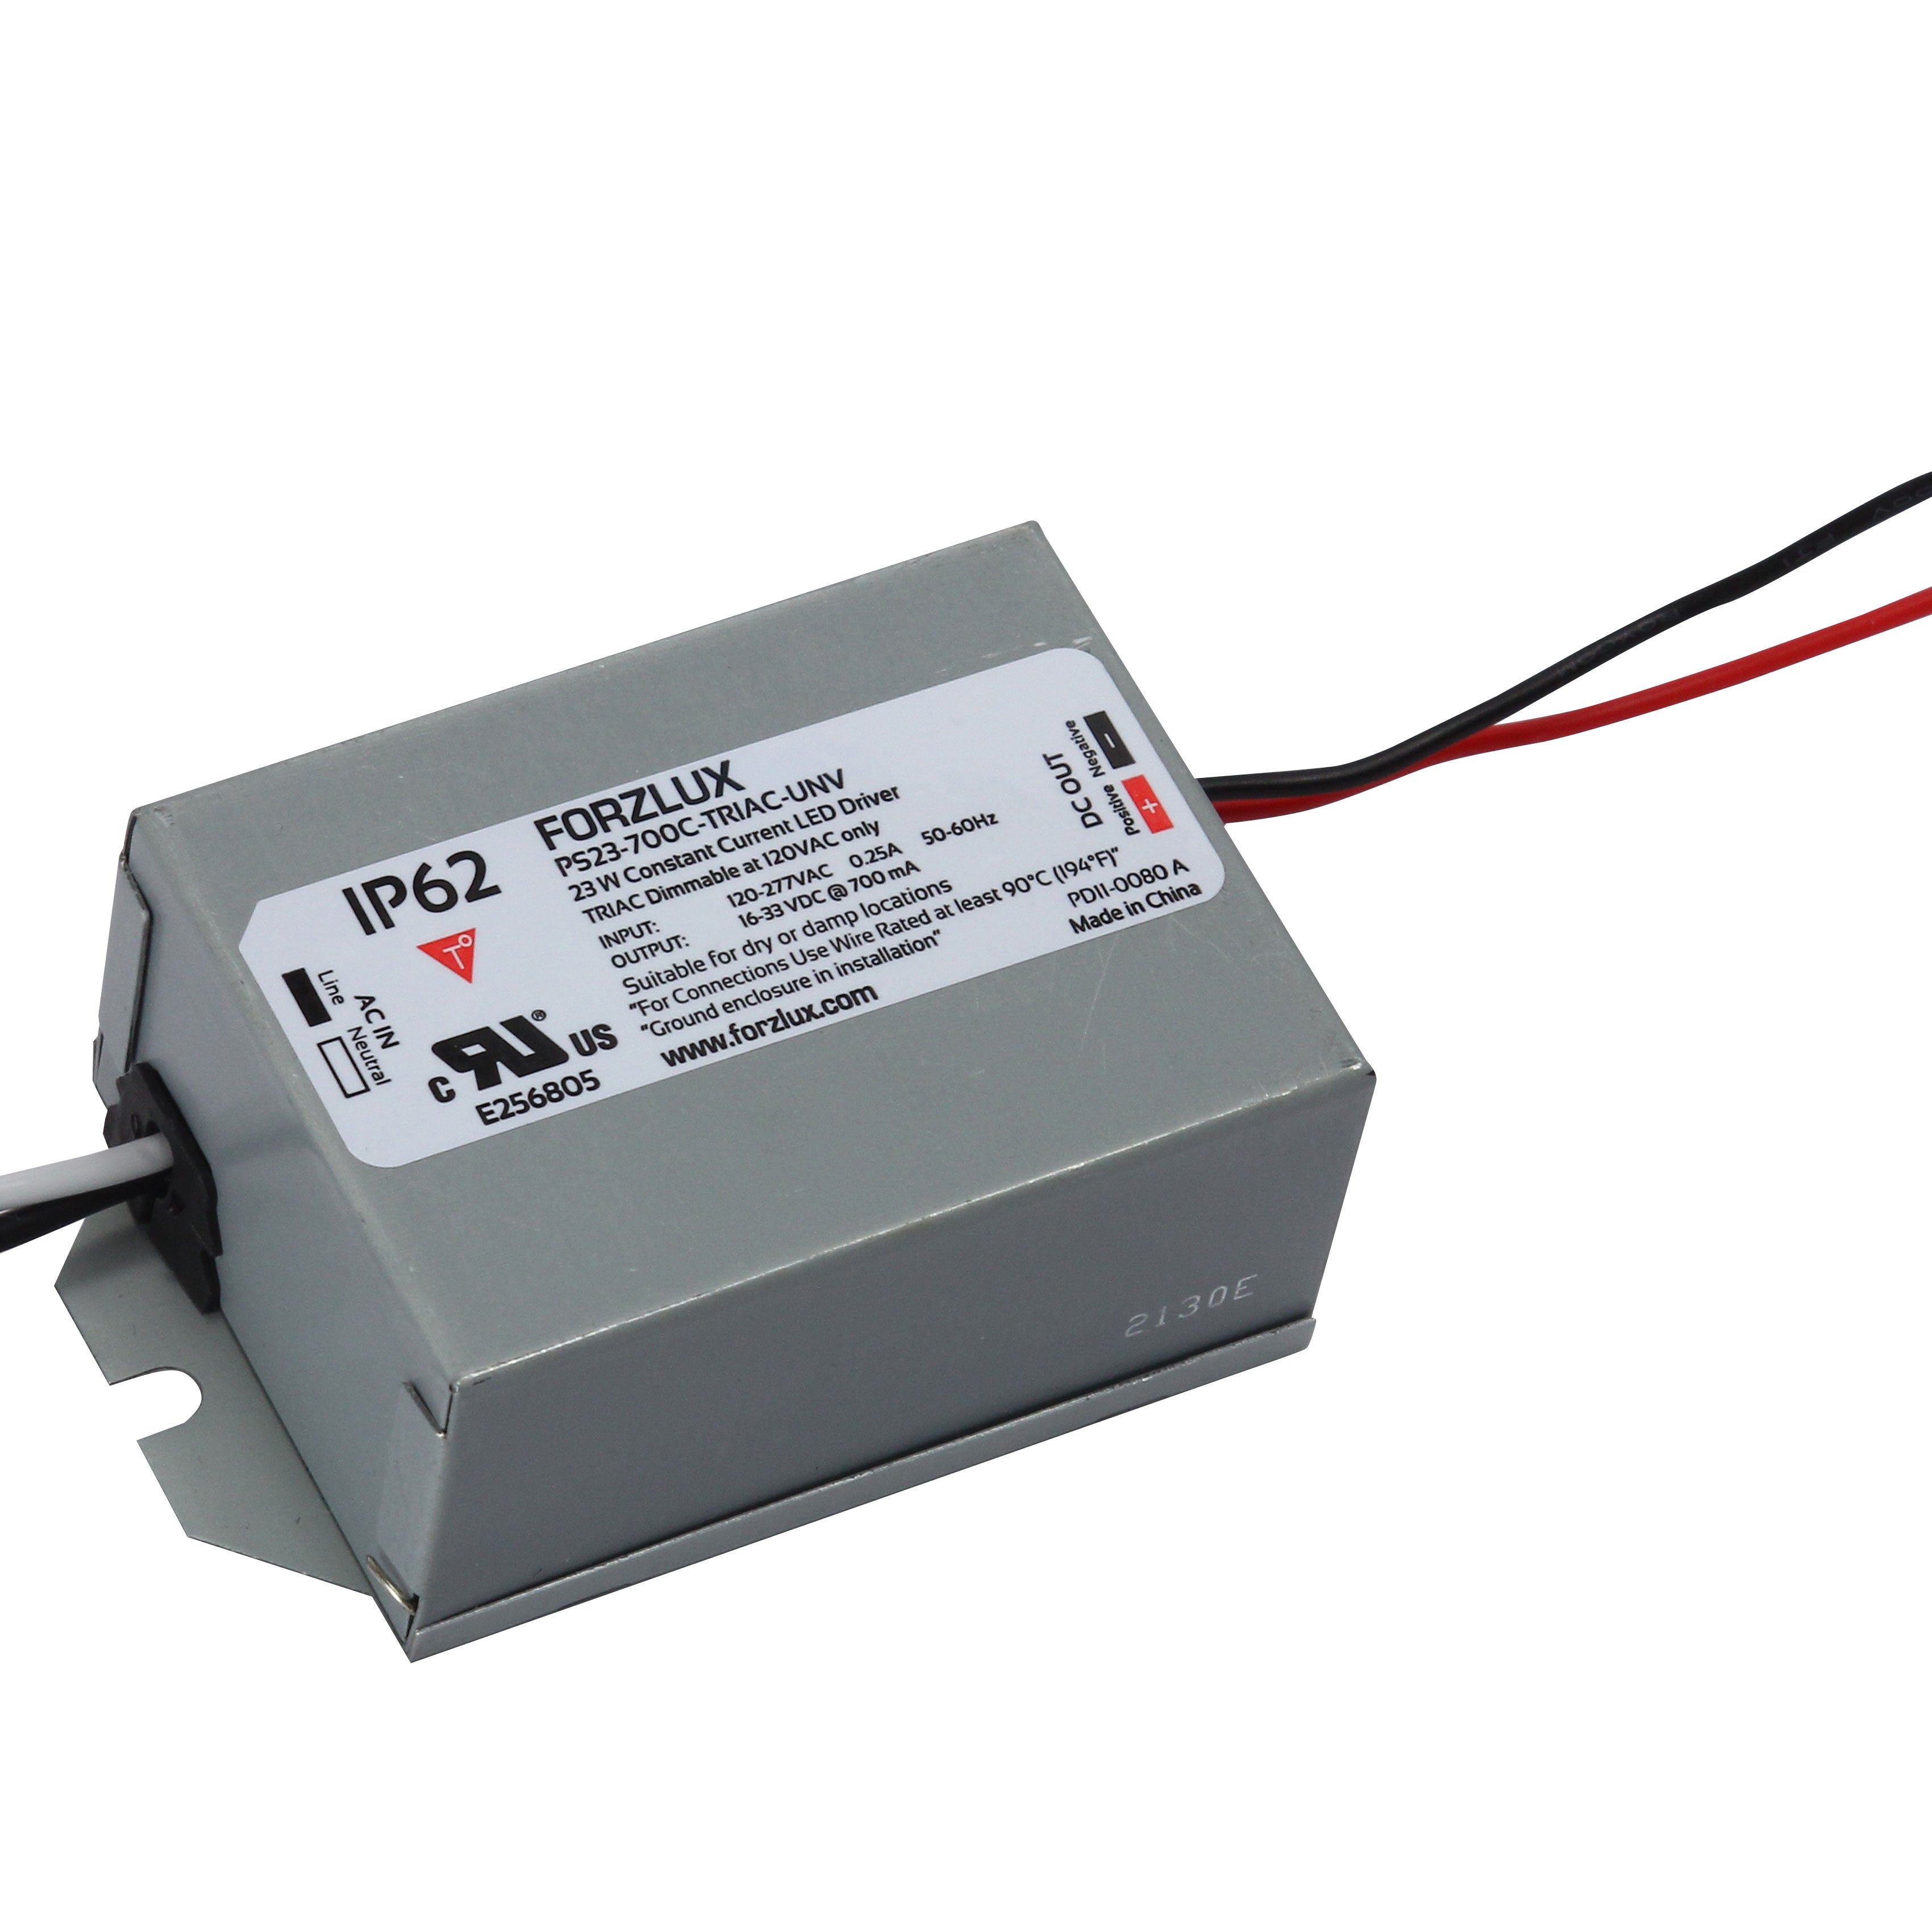 LED Drivers Fixture , Model # FB-PS23 in